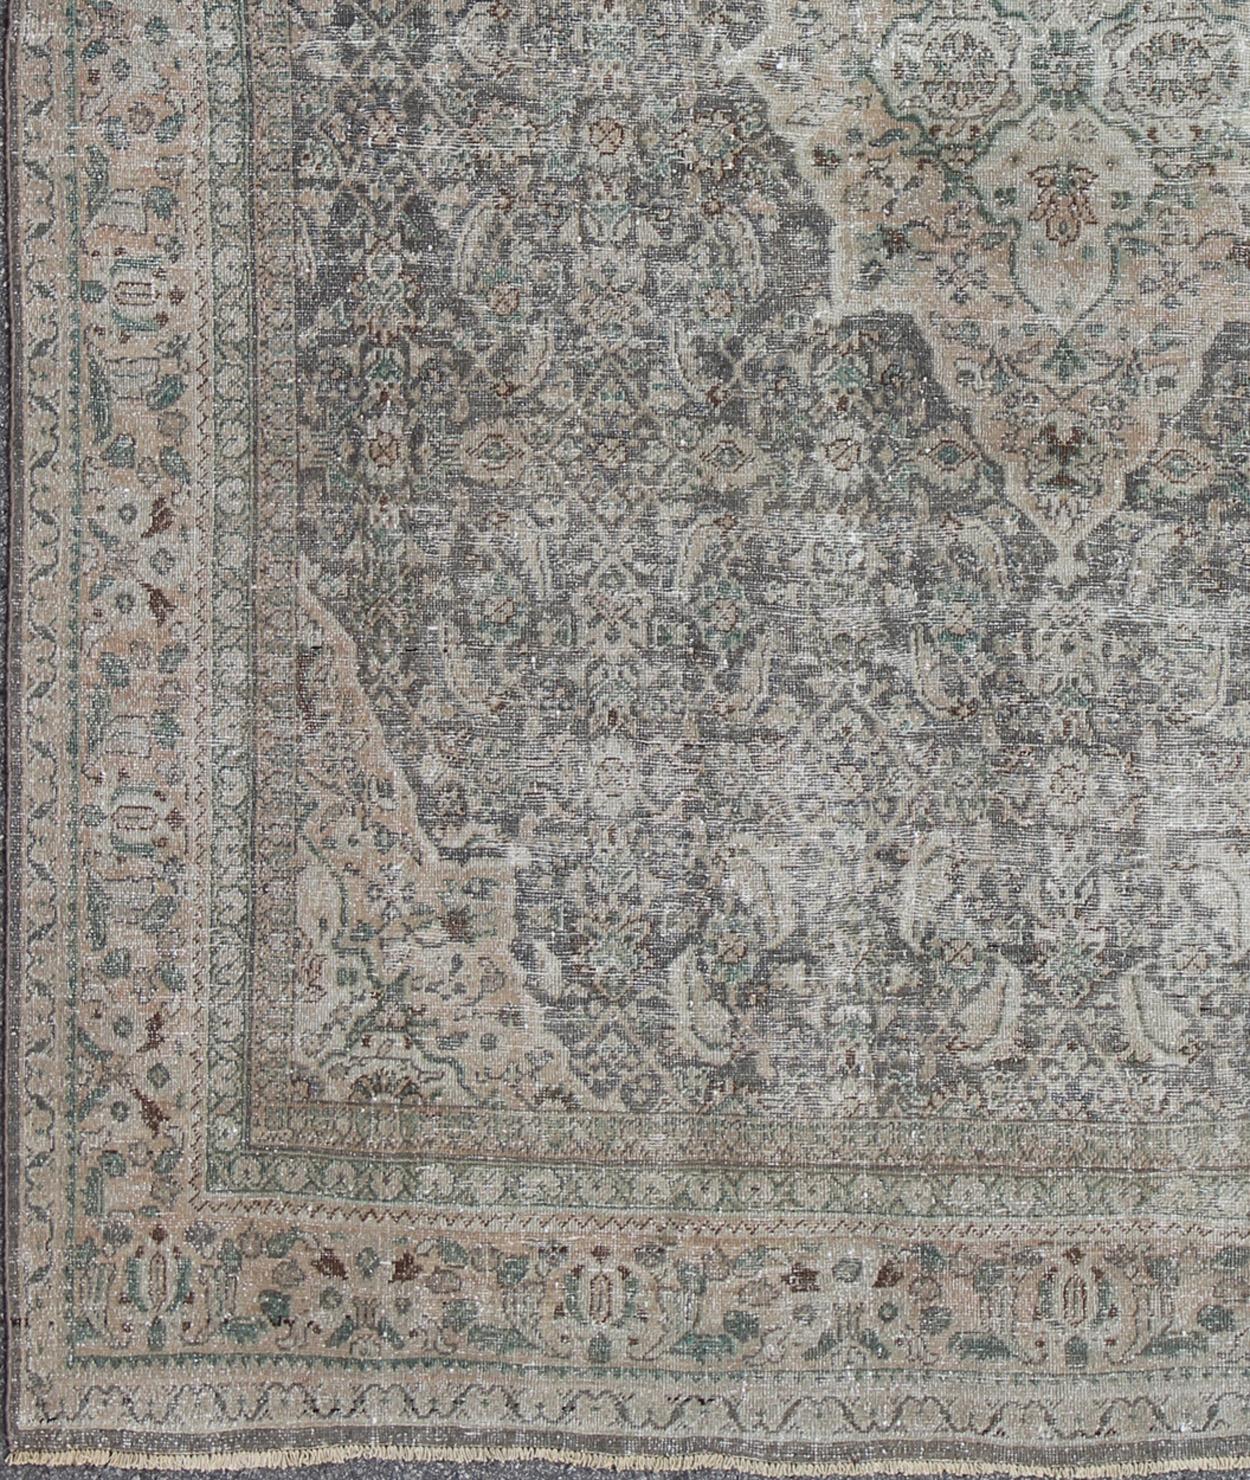 Antique Distressed Persian Mahal/Sultanabad Rug in Light Gray, Blush/Pink In Distressed Condition For Sale In Atlanta, GA